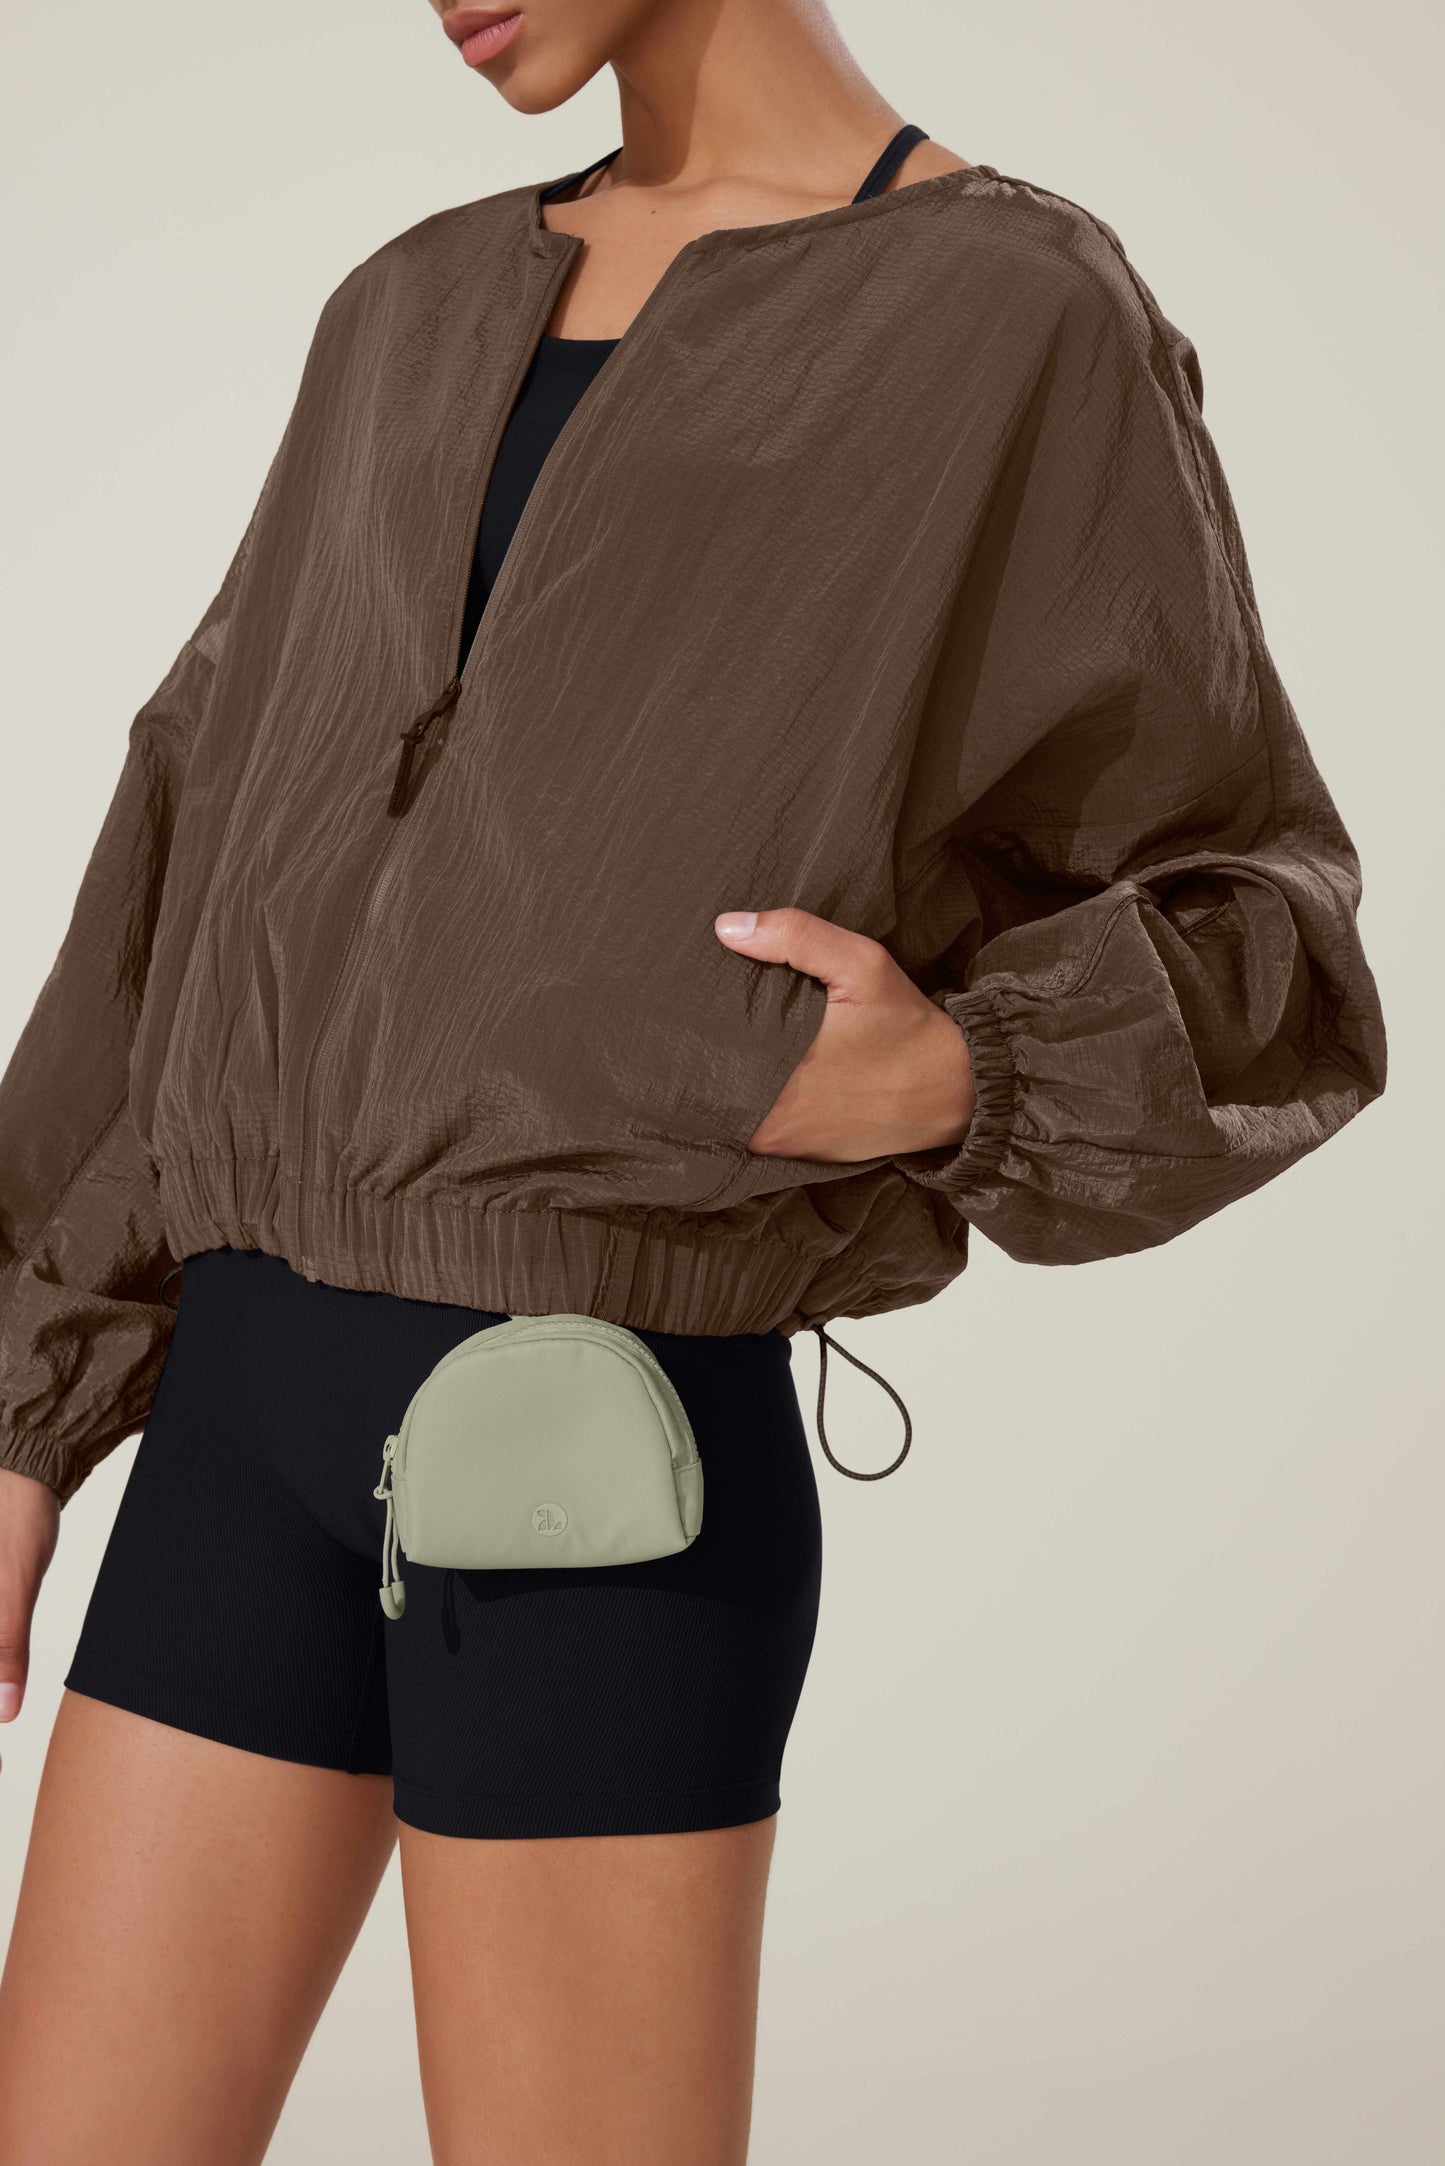 Short Functional Sports and Leisure Sunscreen Jacket